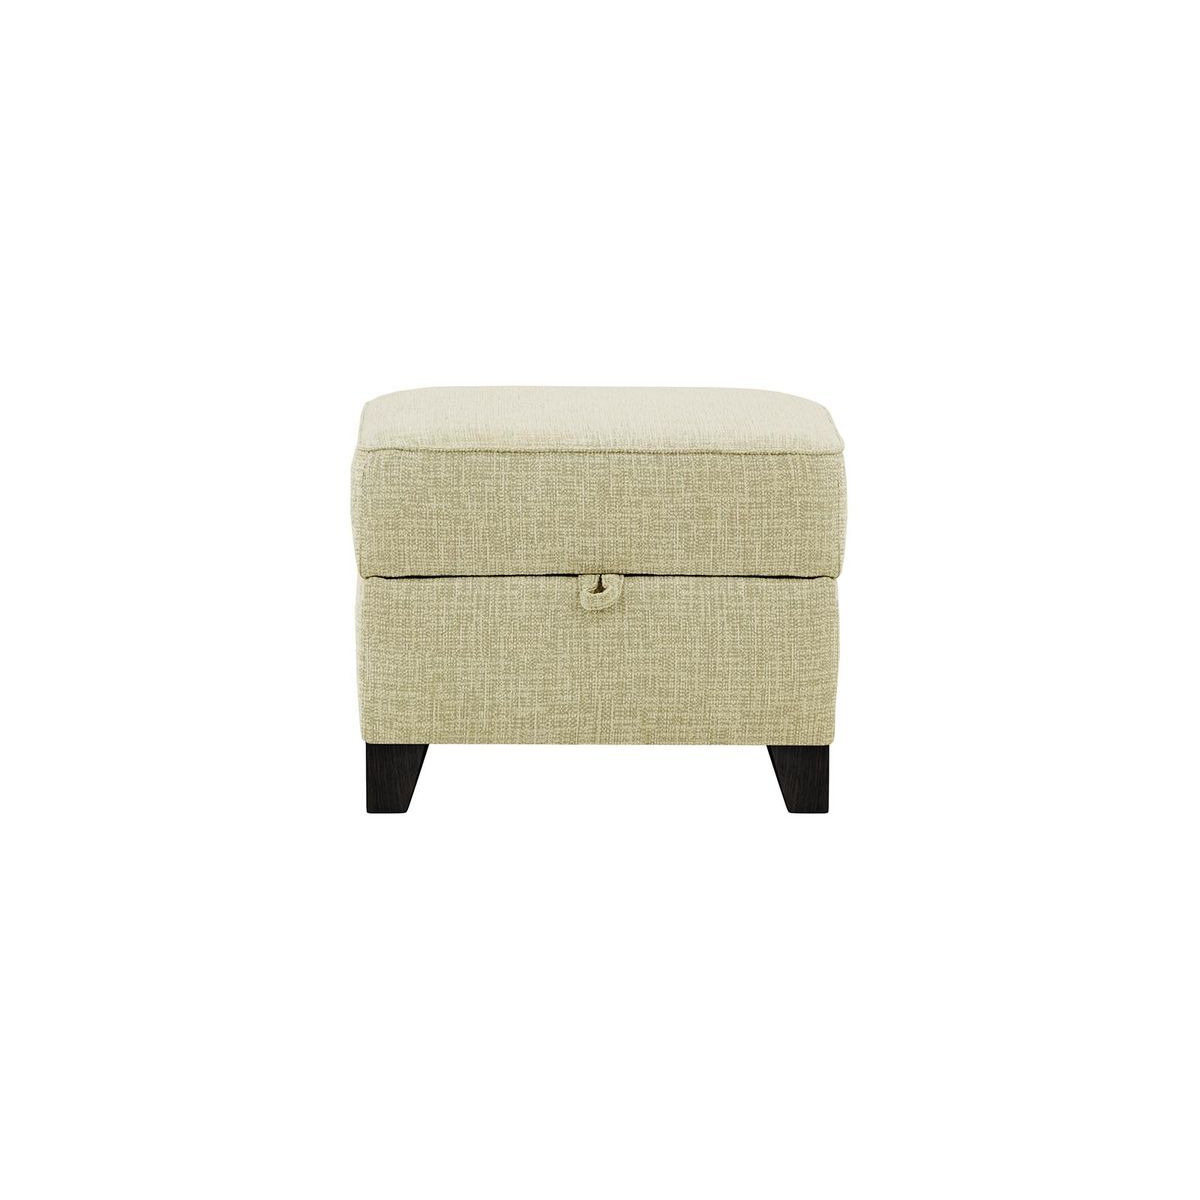 James Footstool with Storage, taupe, Leg colour: black - image 1